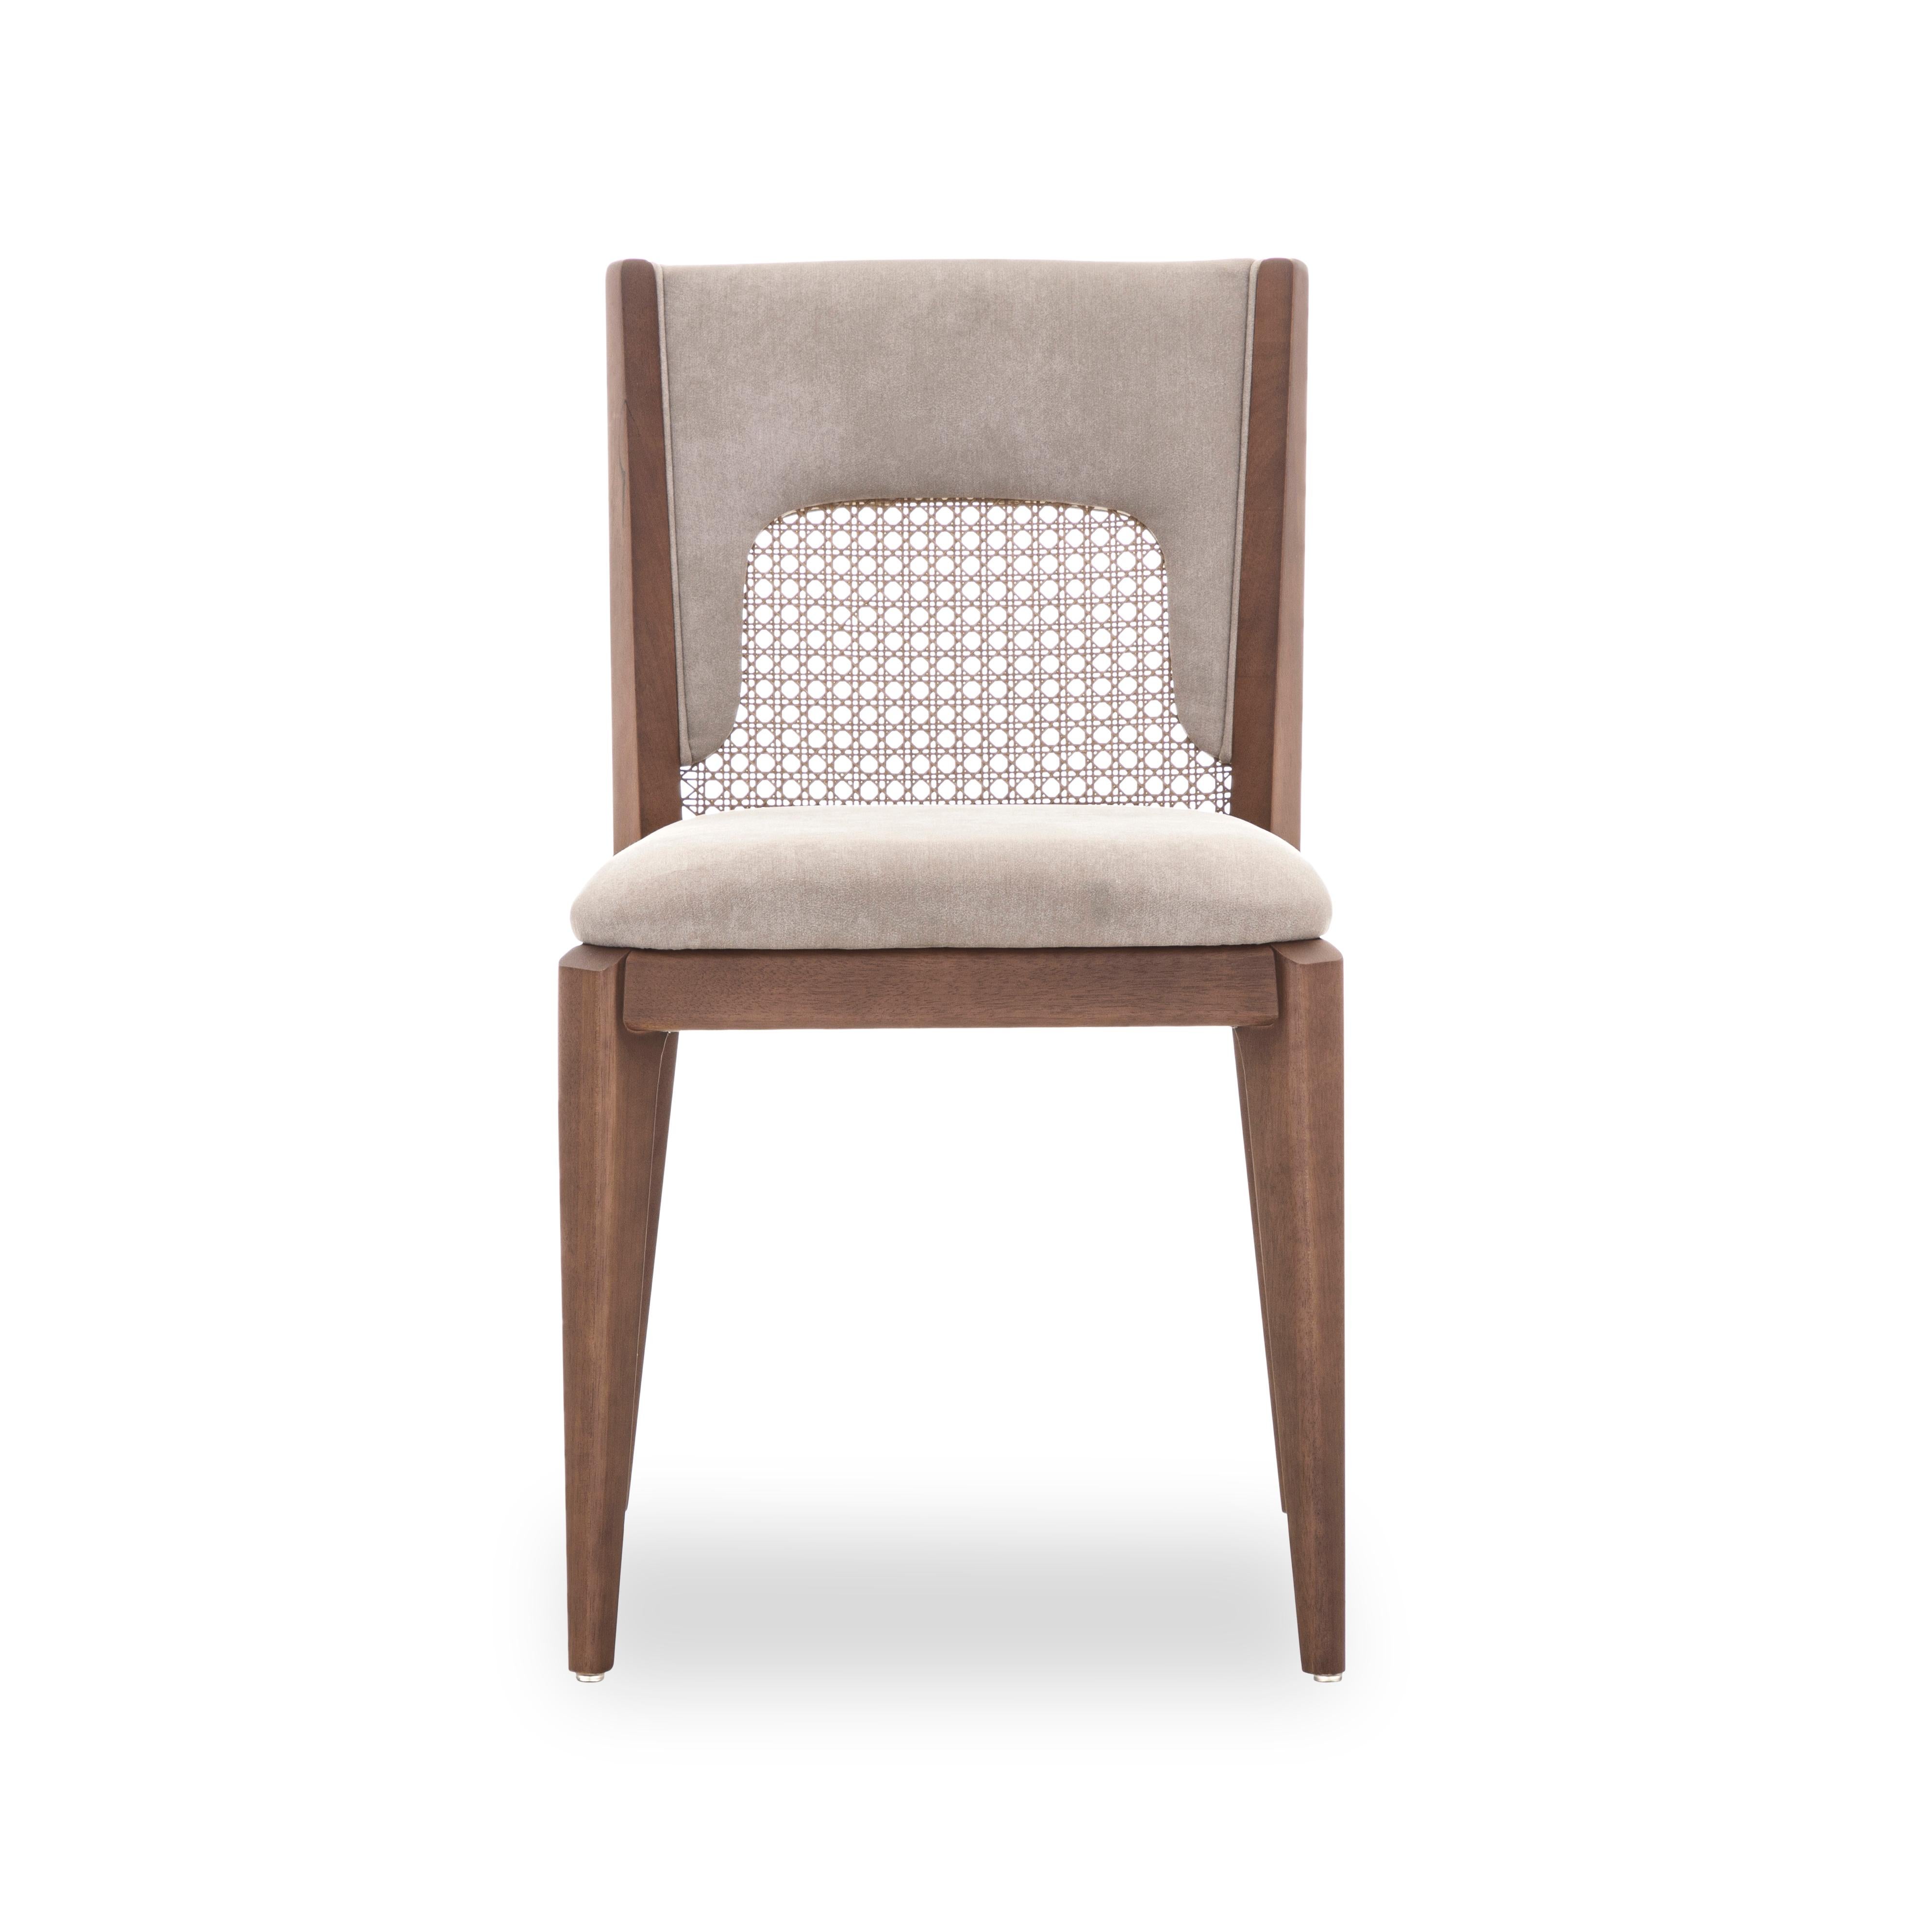 Contemporary Zani Dining Chair in Light Brown Upholstery and Walnut Wood Finish, Set of 2 For Sale